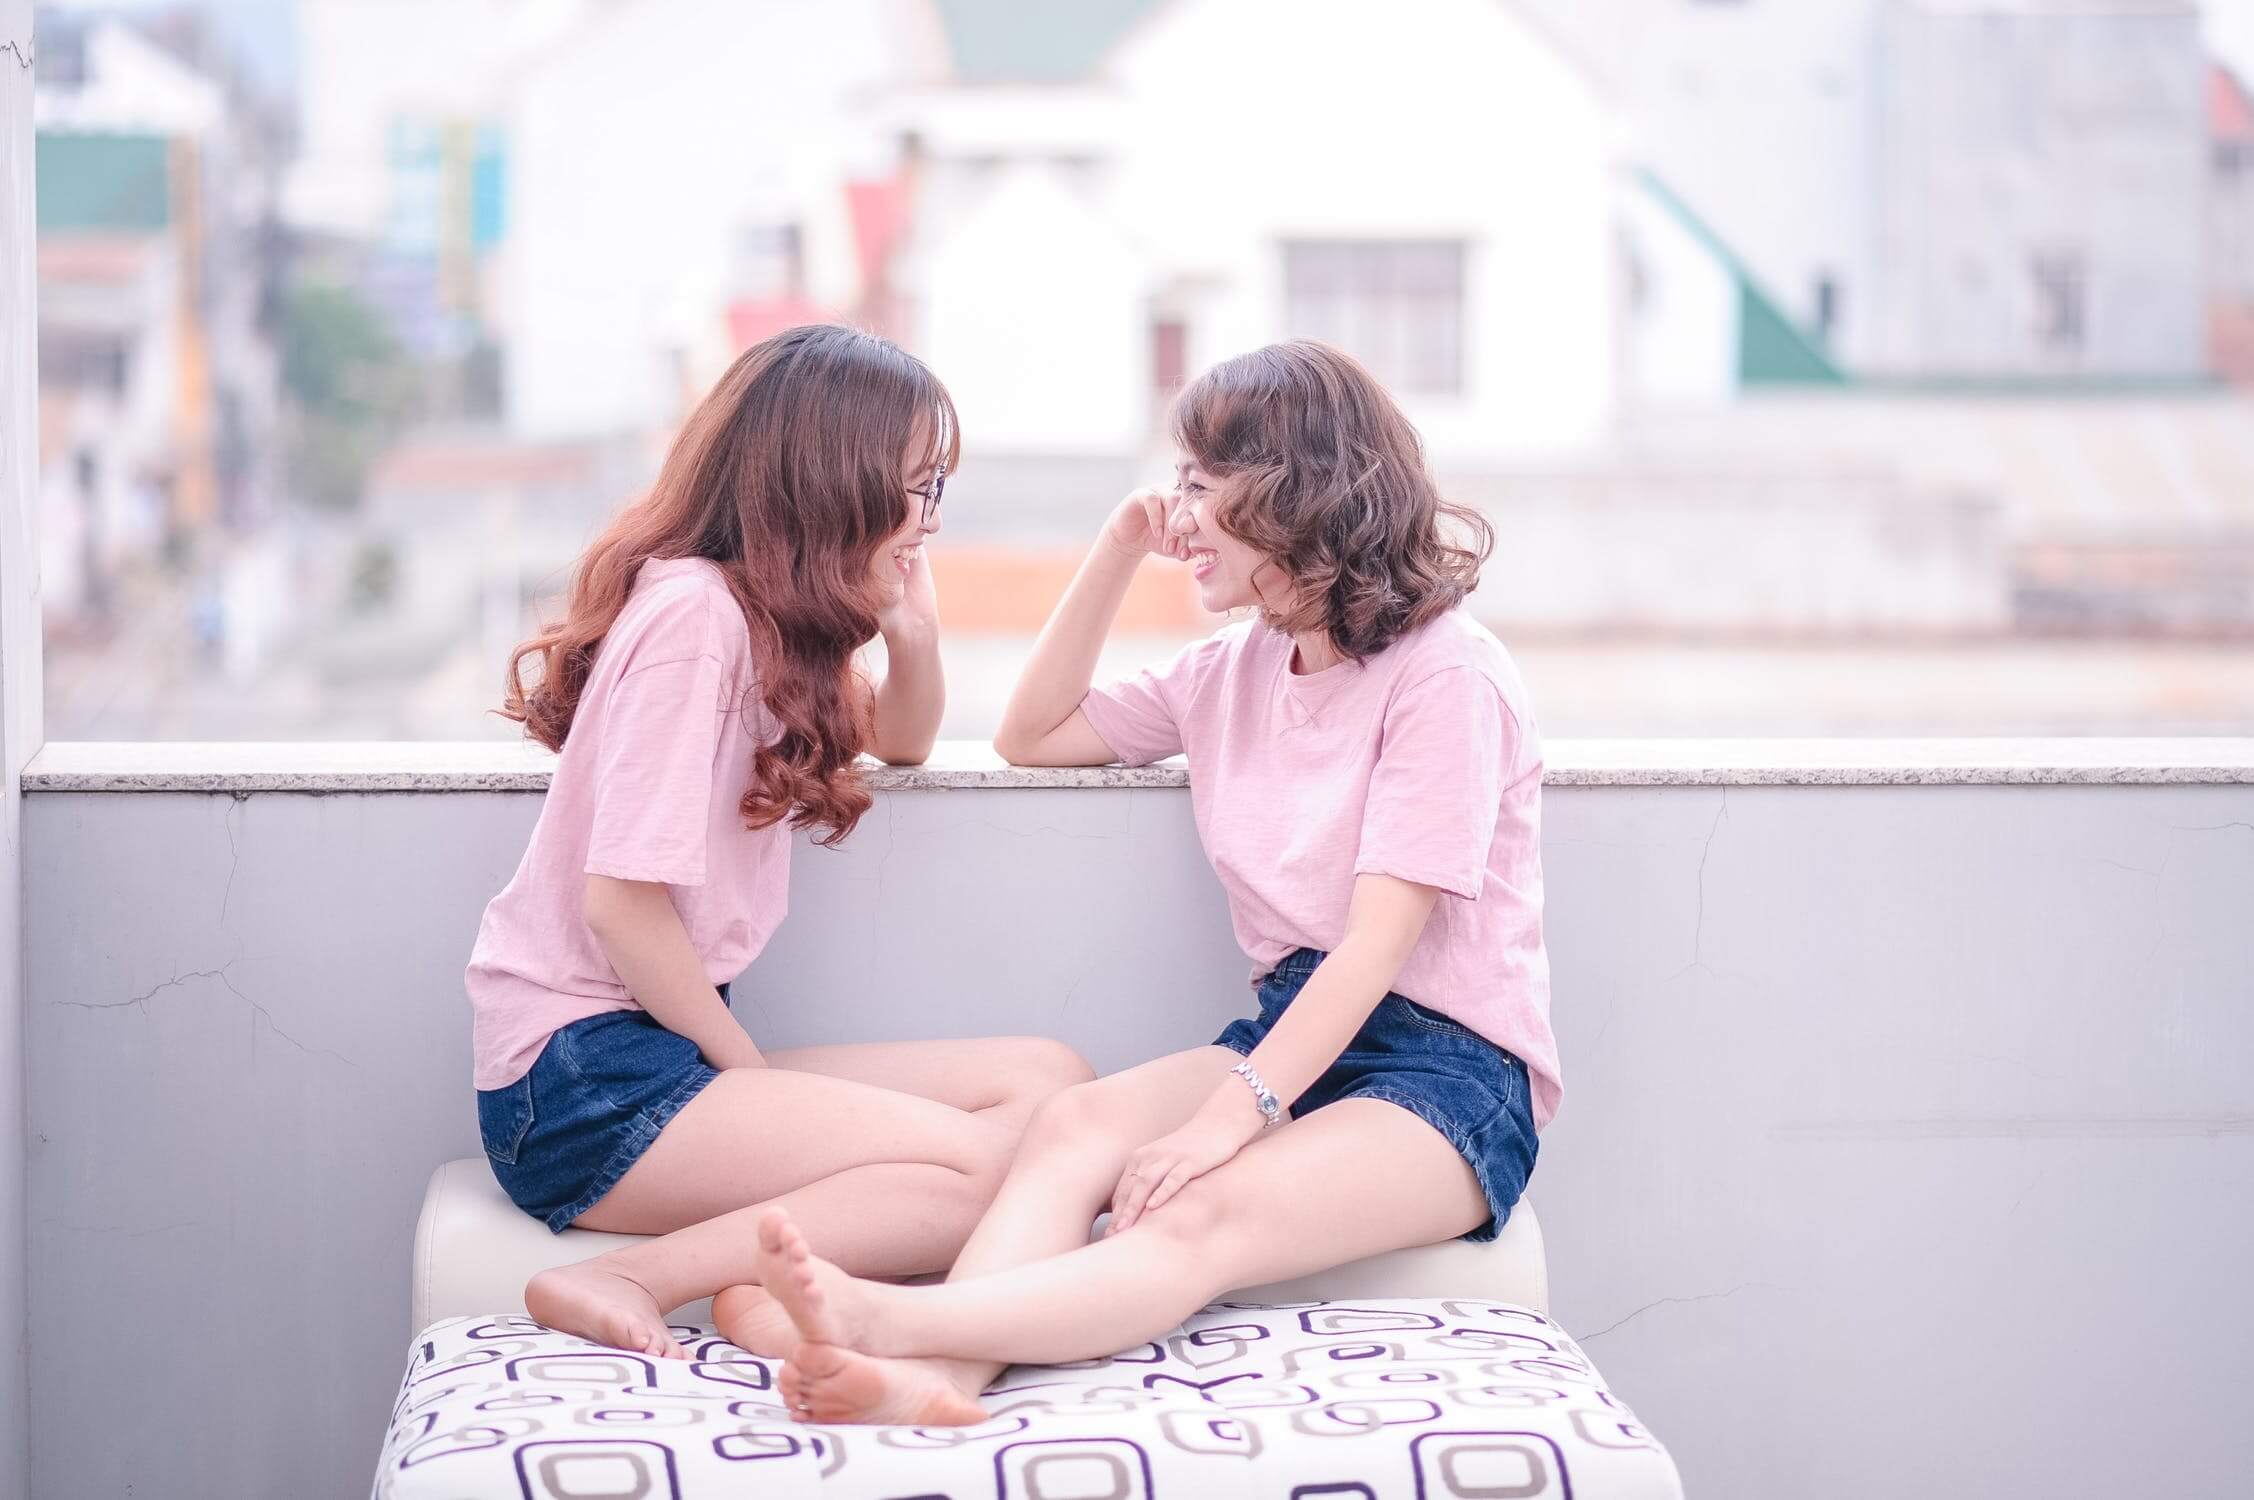 Two female identical twins sit on a rooftop and smile at each other